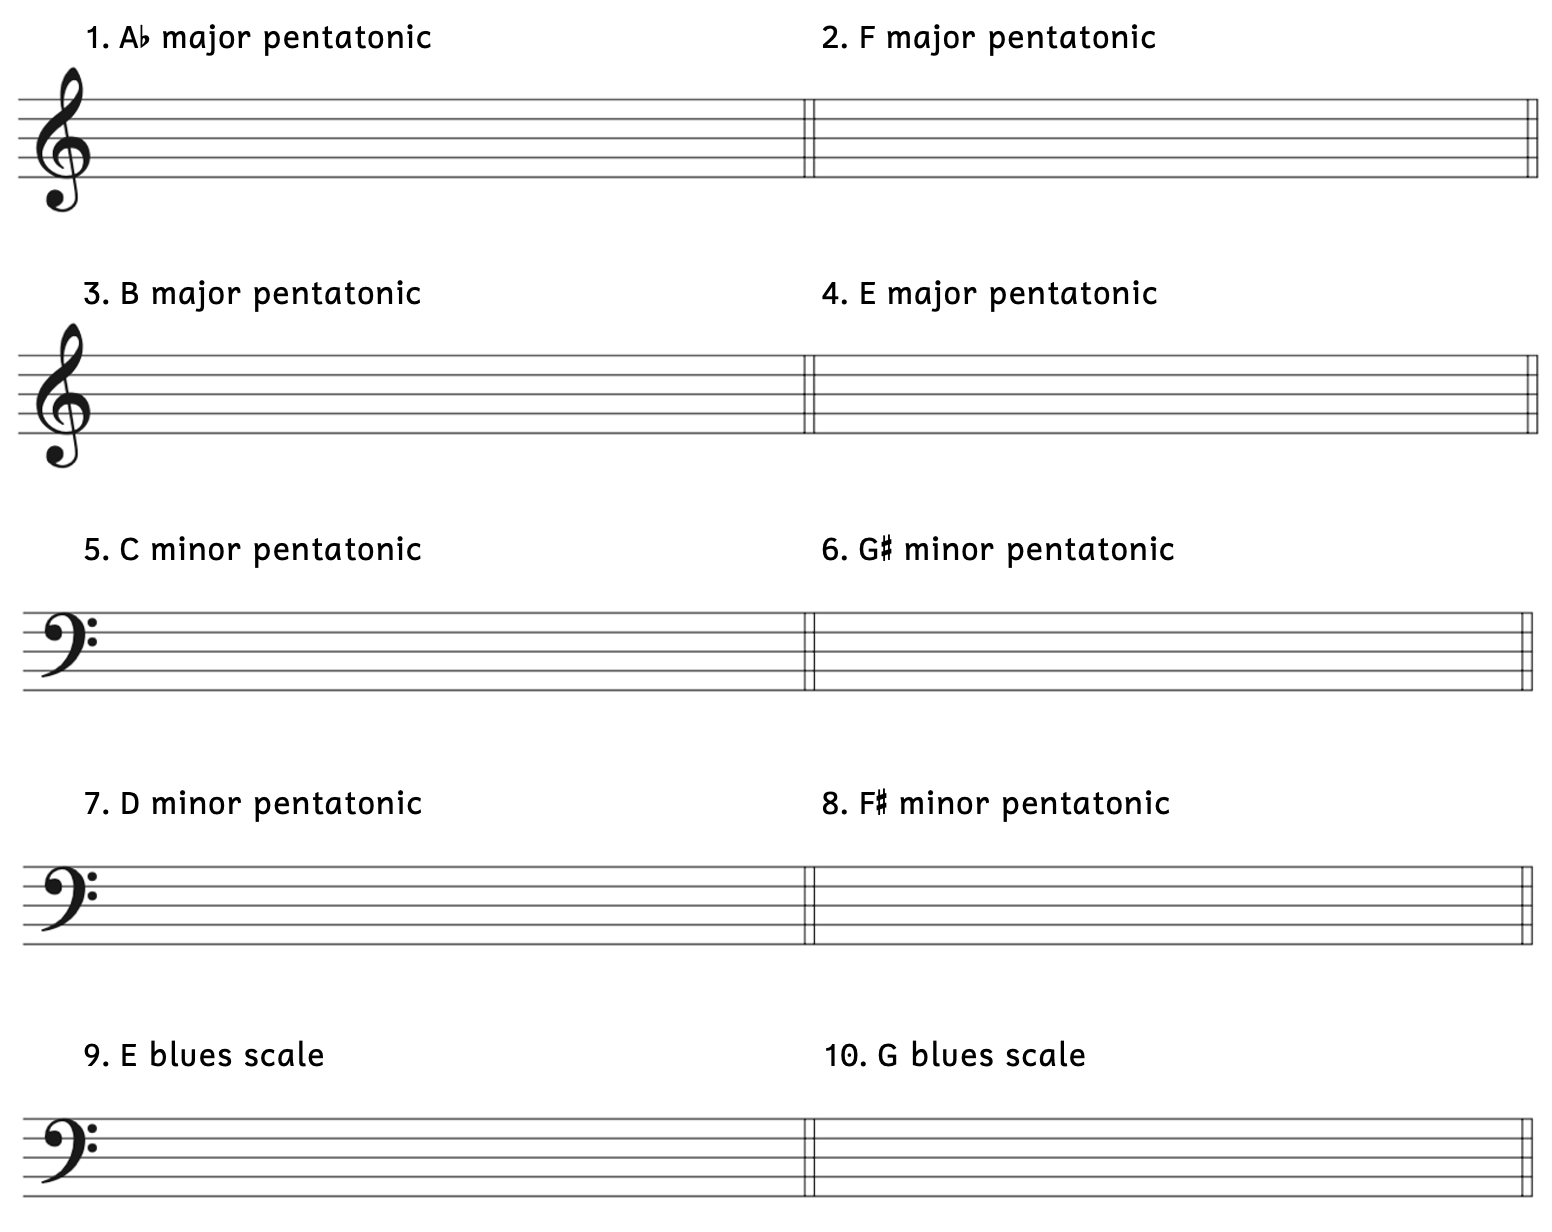 Number 1, A-flat major pentatonic. Number 2, F major pentatonic. Number 3, B major pentatonic. Number 4, E major pentatonic. Number 5, C minor pentatonic. Number 6, G-sharp minor pentatonic. Number 7, D minor pentatonic. Number 8, F-sharp minor pentatonic. Number 9, E blues scale. Number 10, G blues scale.